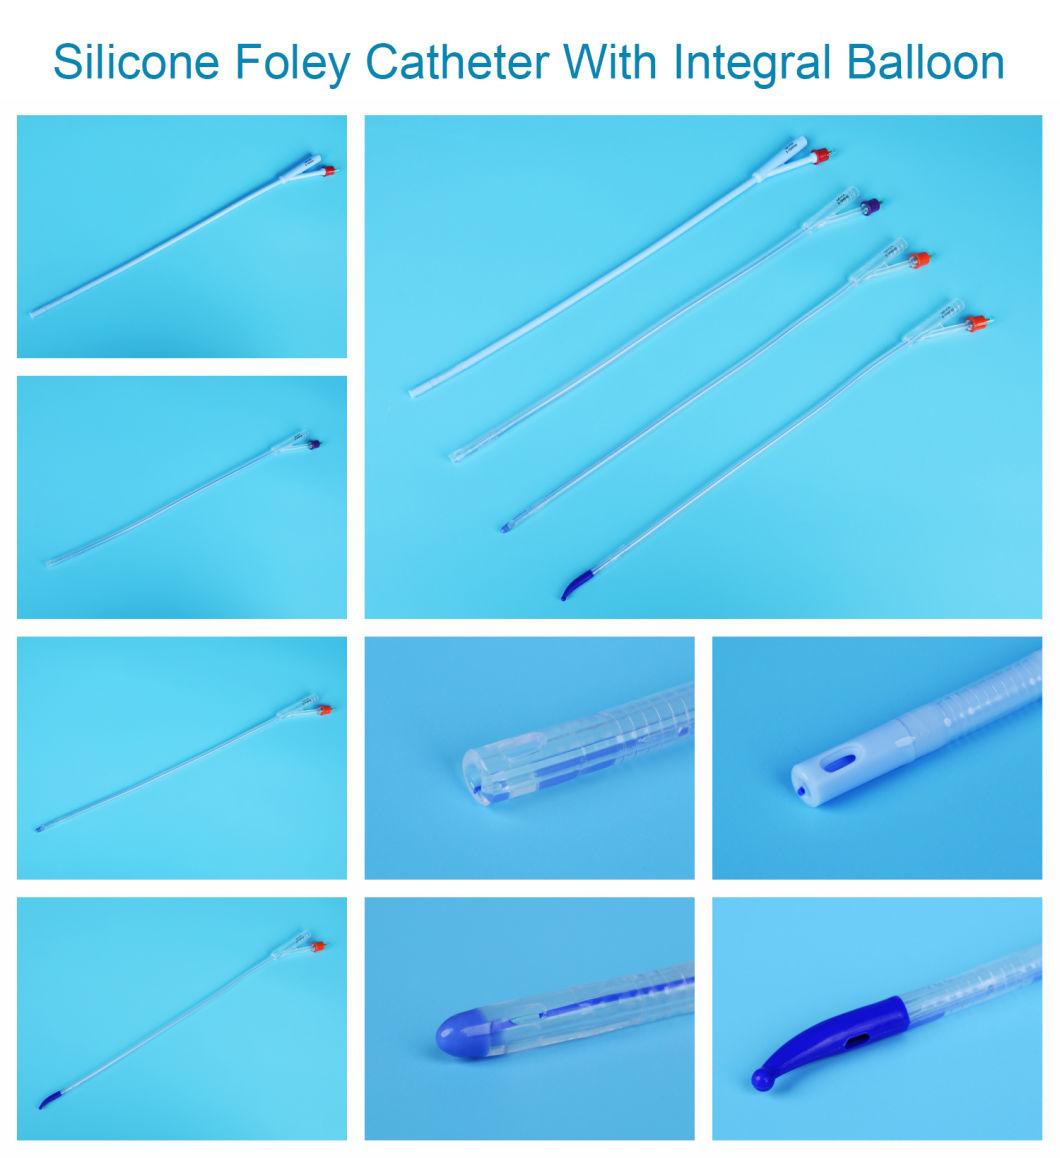 Integrated Flat Balloon Silicone Urinary Catheter with Unibal Integral Balloon Technology Open Tipped Suprapubic Use 2 Way Blue